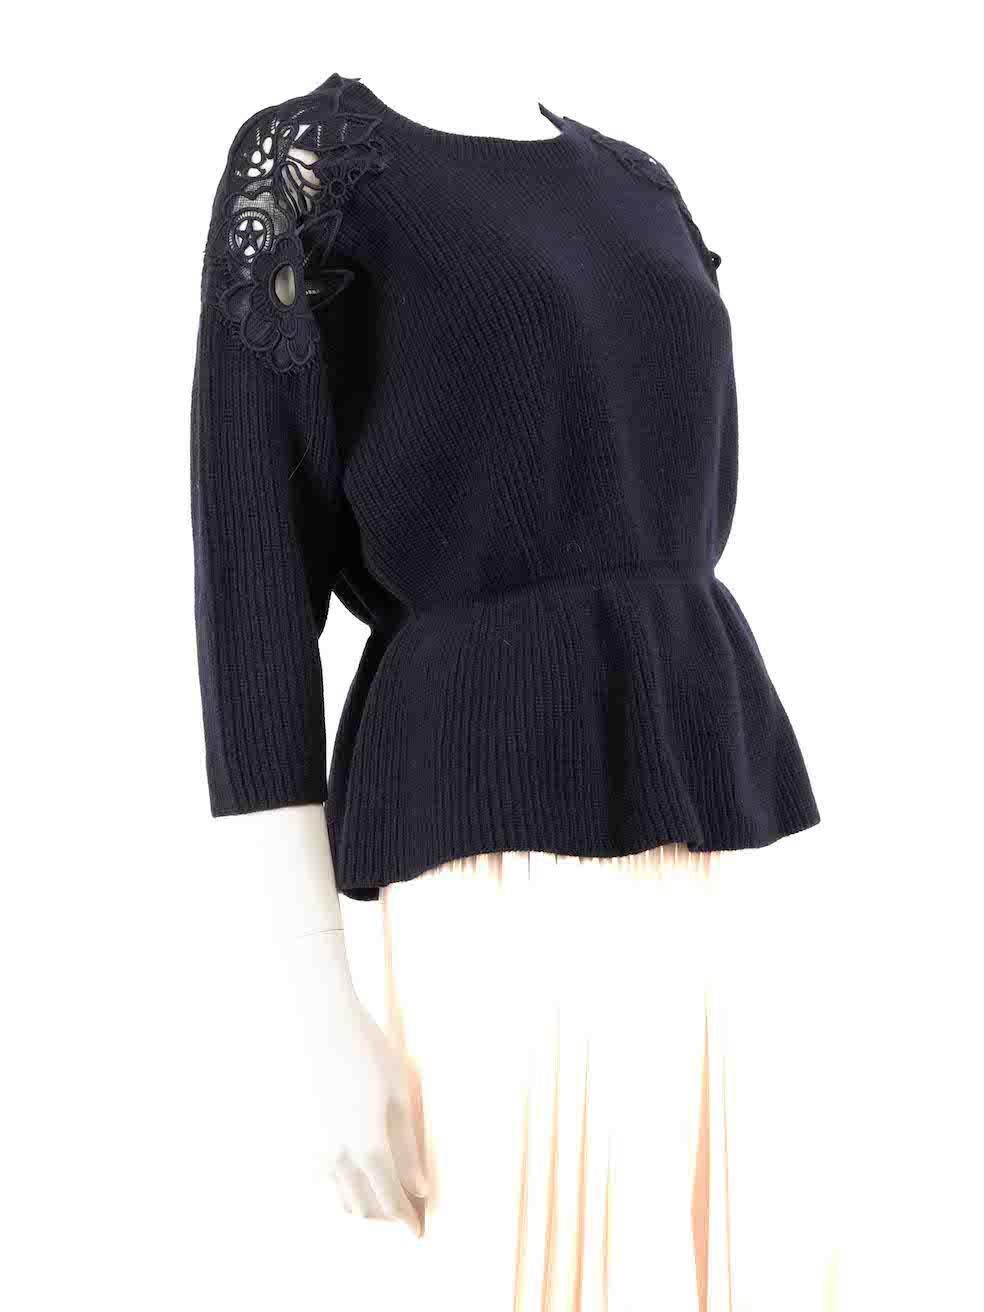 CONDITION is Very good. Hardly any visible wear to jumper is evident on this used Chloé designer resale item.
 
 Details
 Navy
 Wool
 Mid length sweater
 Round neckline
 Knitted and stretchy
 Flower embroidered detail on shoulder
 Elasticated